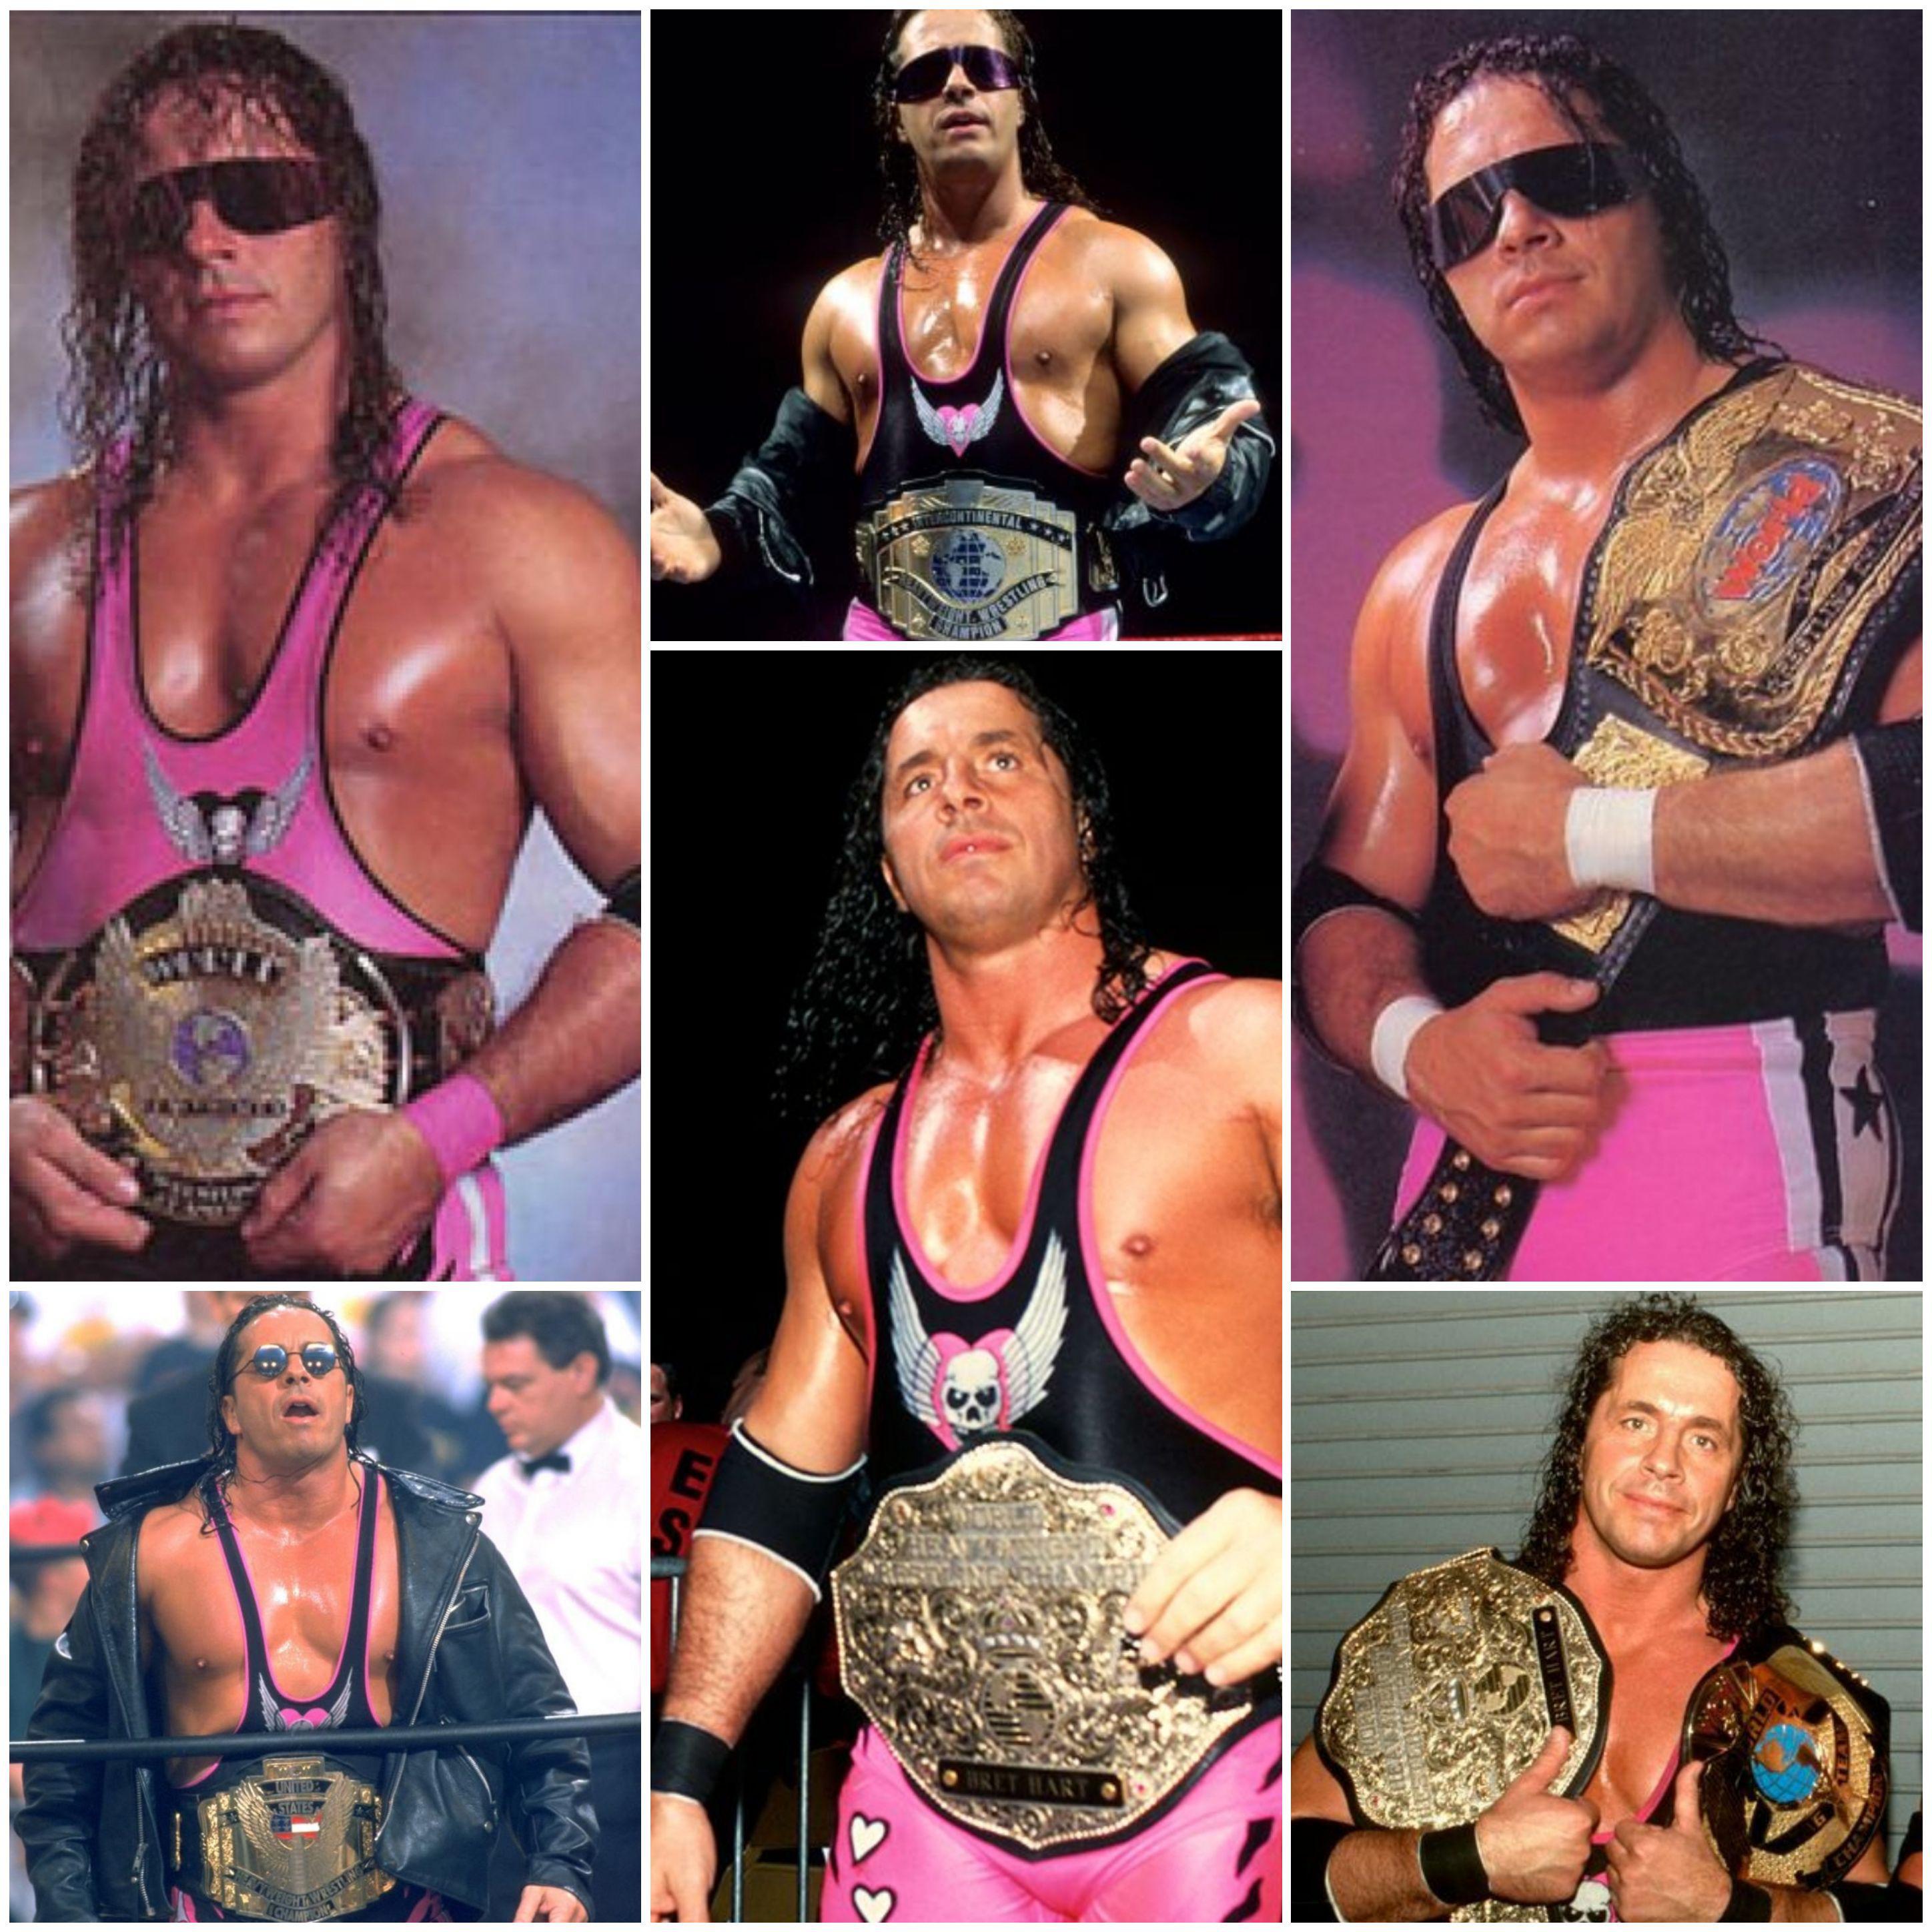 How Tall Is Bret Hart?